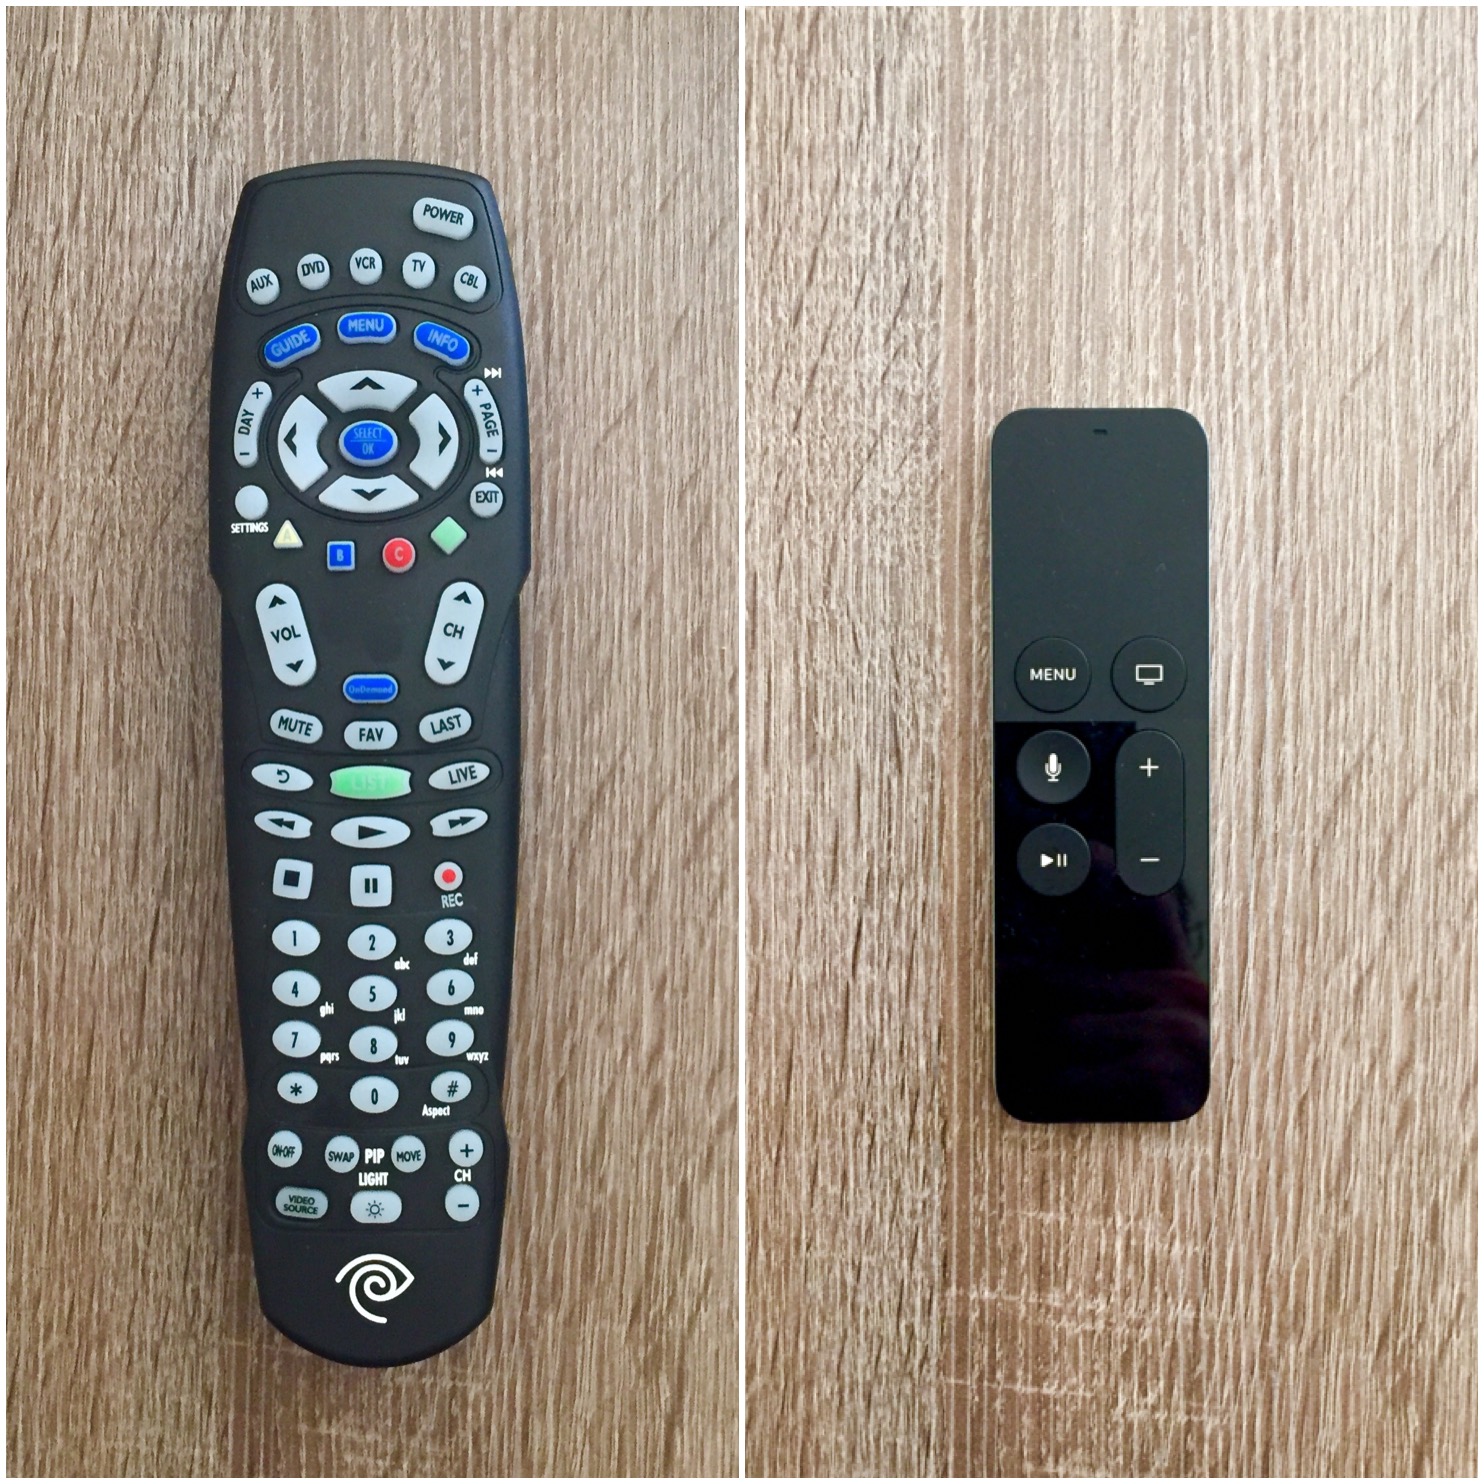 On the left, a standard cable TV remote. On the right, an AppleTV remote.